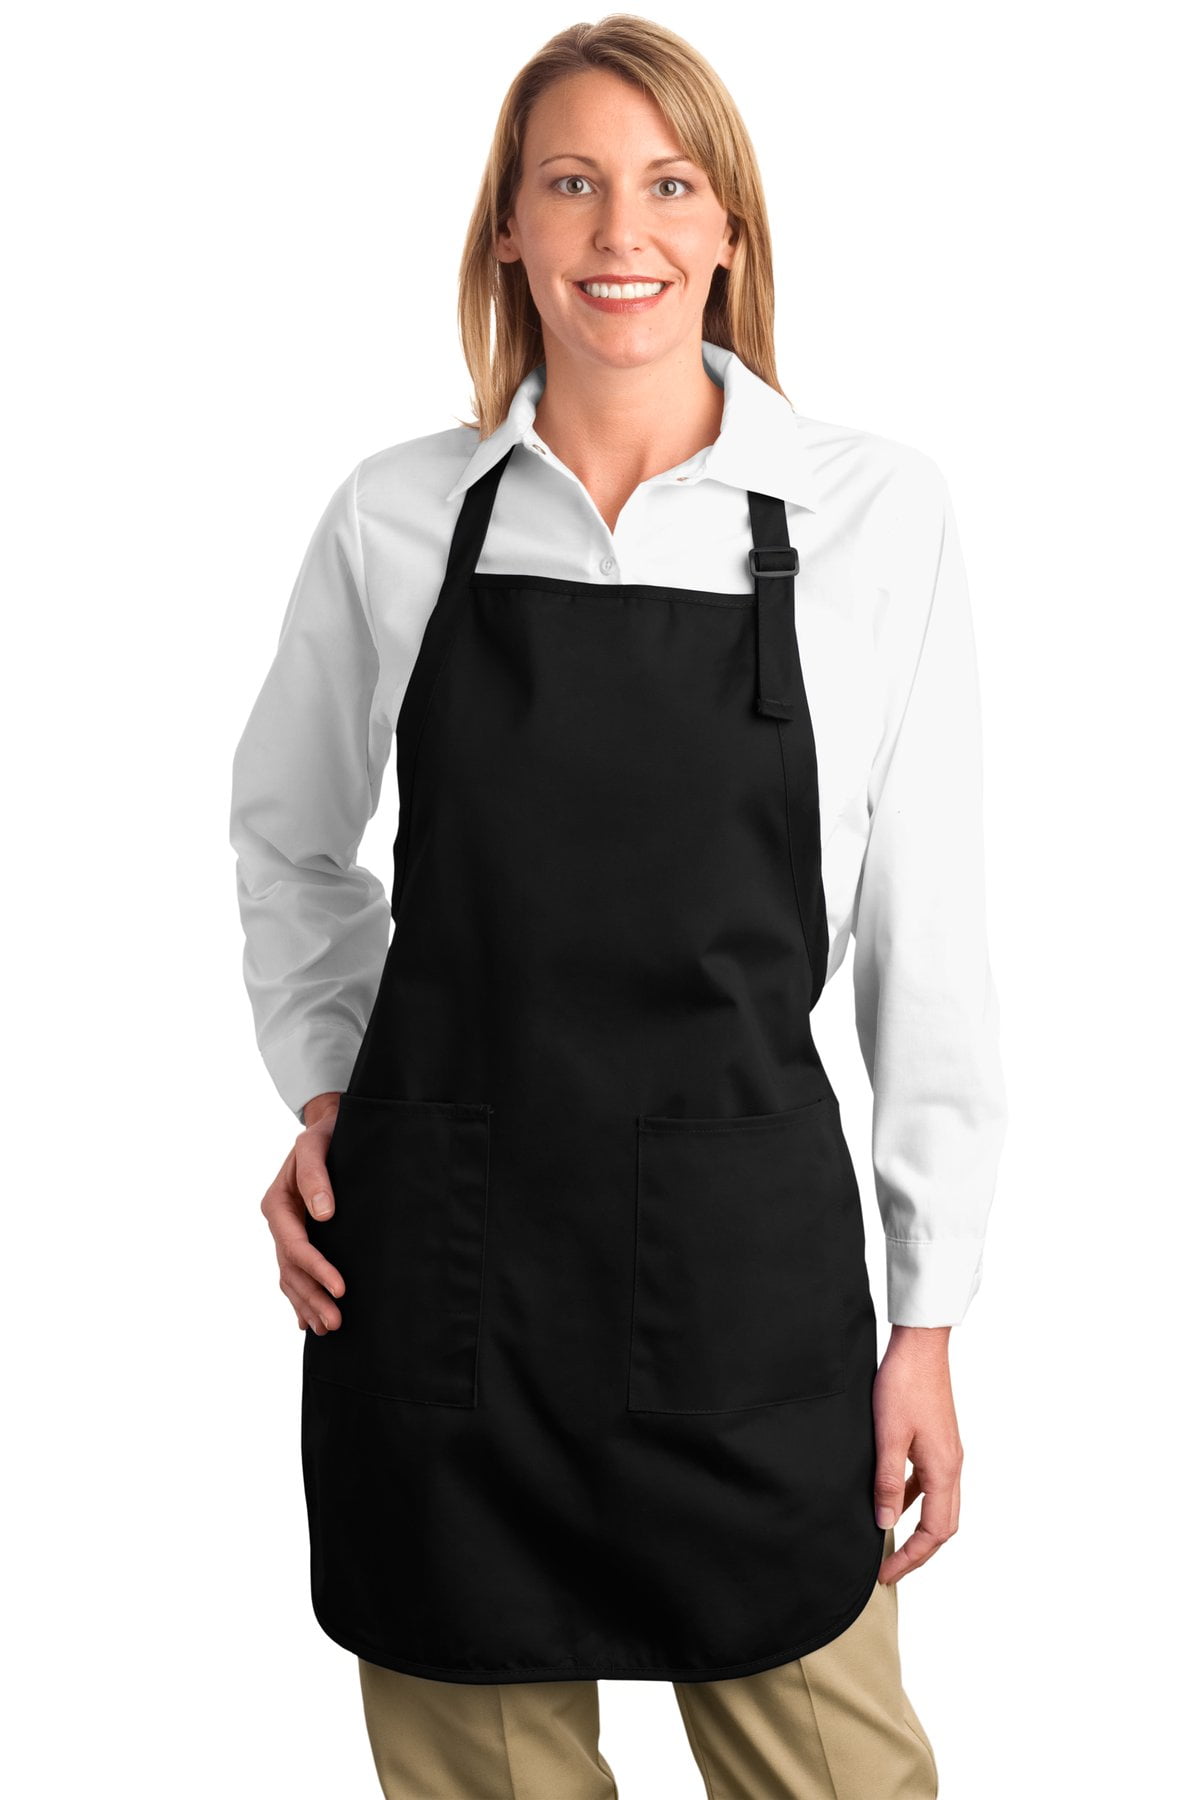 Port Authority Full Length Apron with Pockets